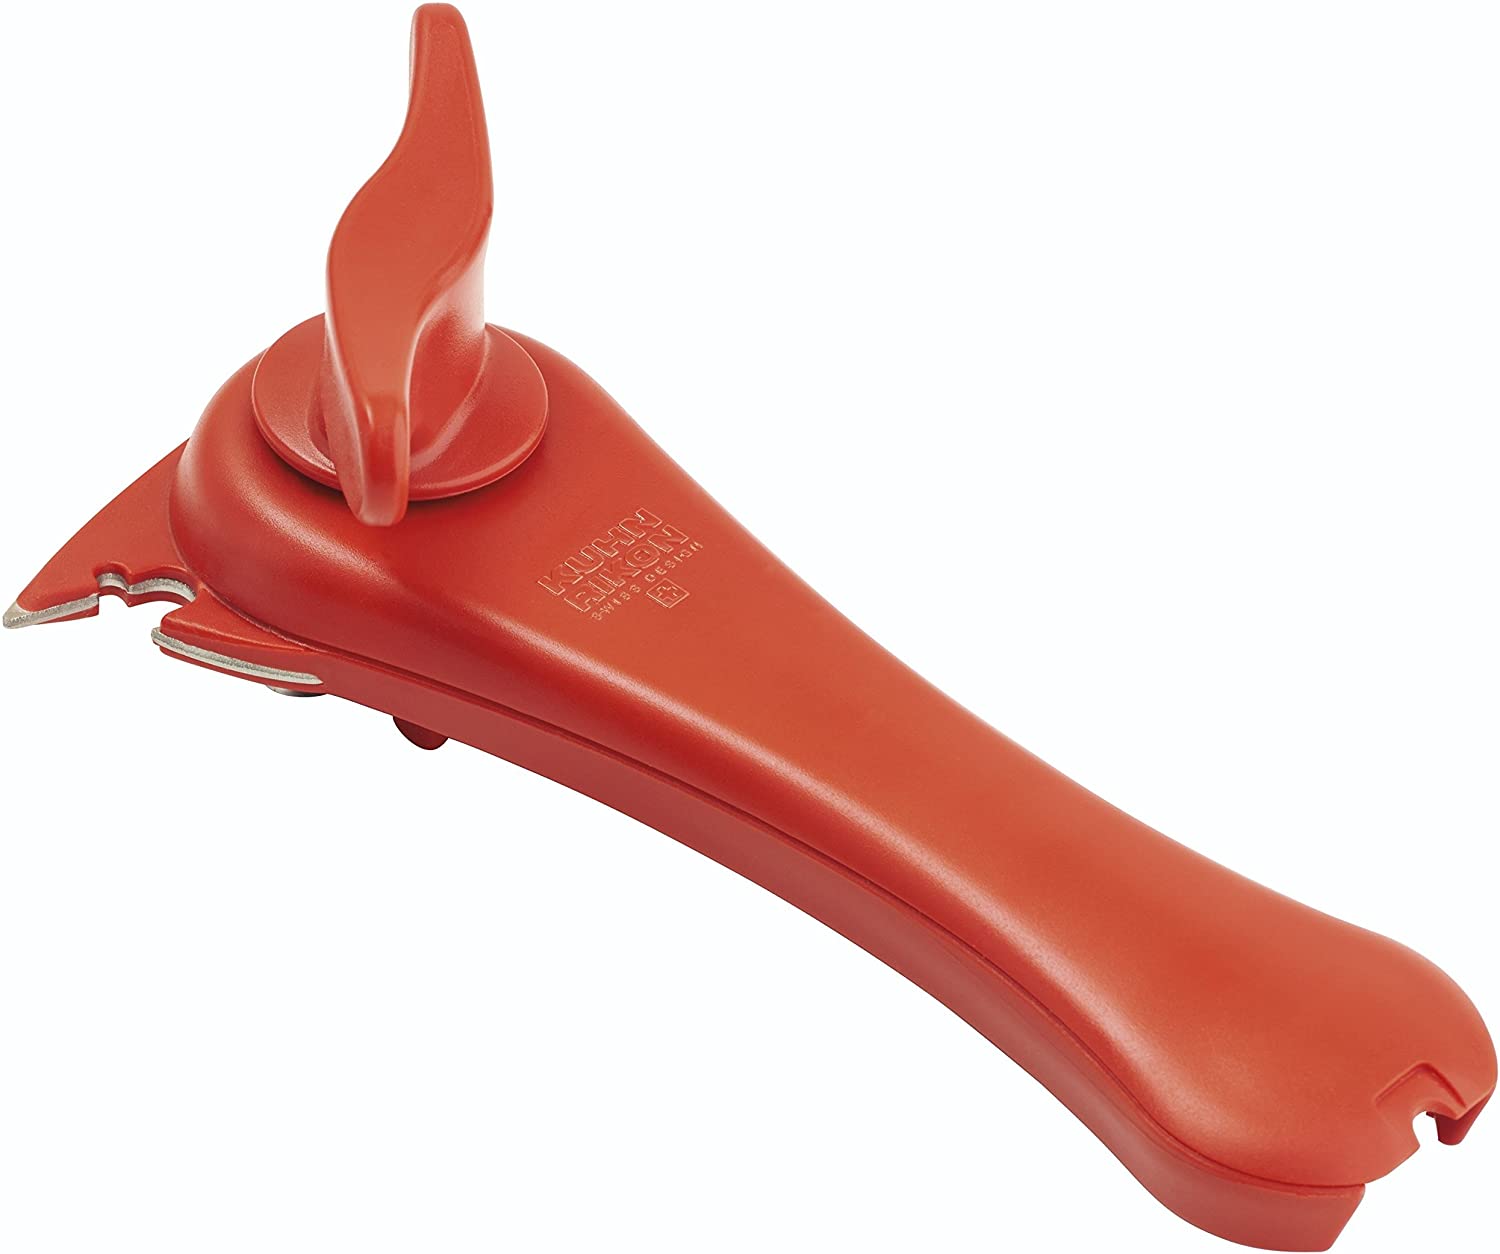 KUHN RIKON 5-in-1 Red Can Opener, Automatically Holds The Edge Of The Can, Little Effort Required, Opens Cans, Bottles, Cap And More, 18 x 9.5 x 6.3 cm